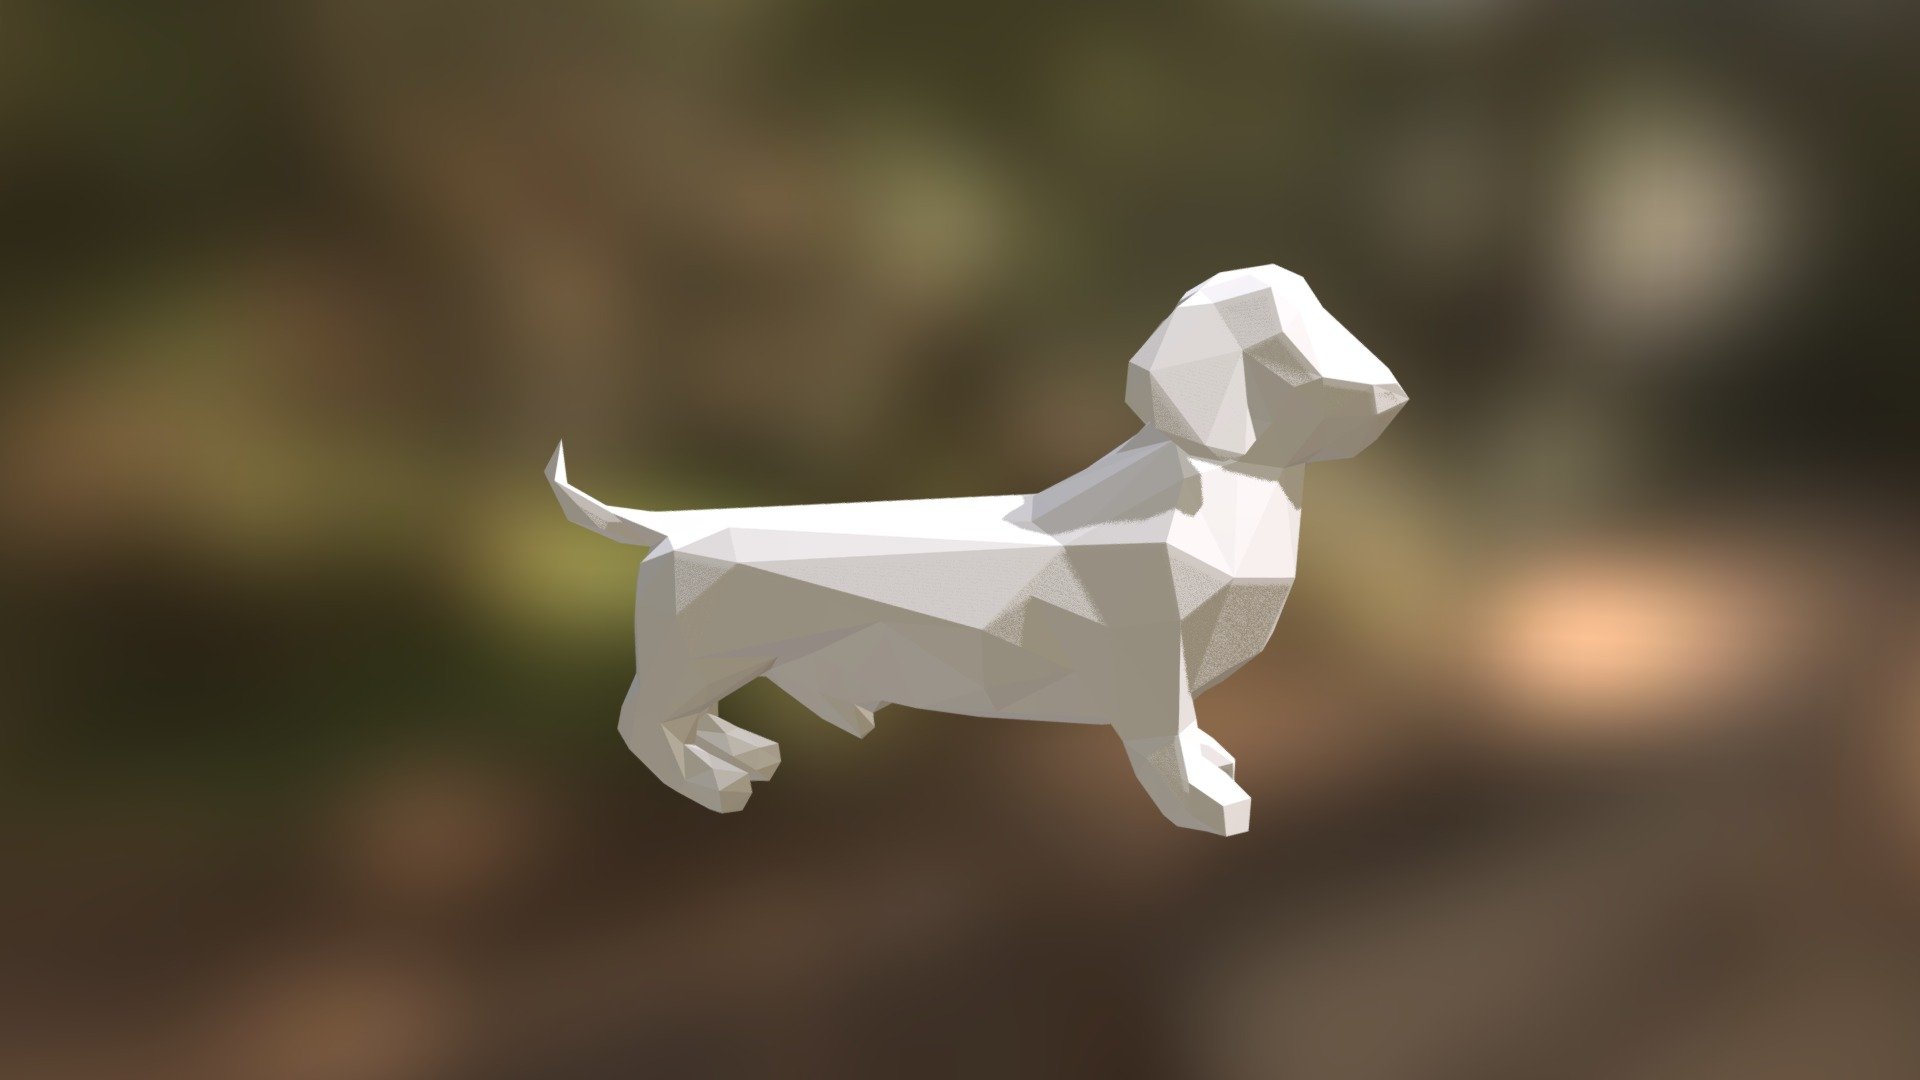 Dachshund low poly model for 3D printing